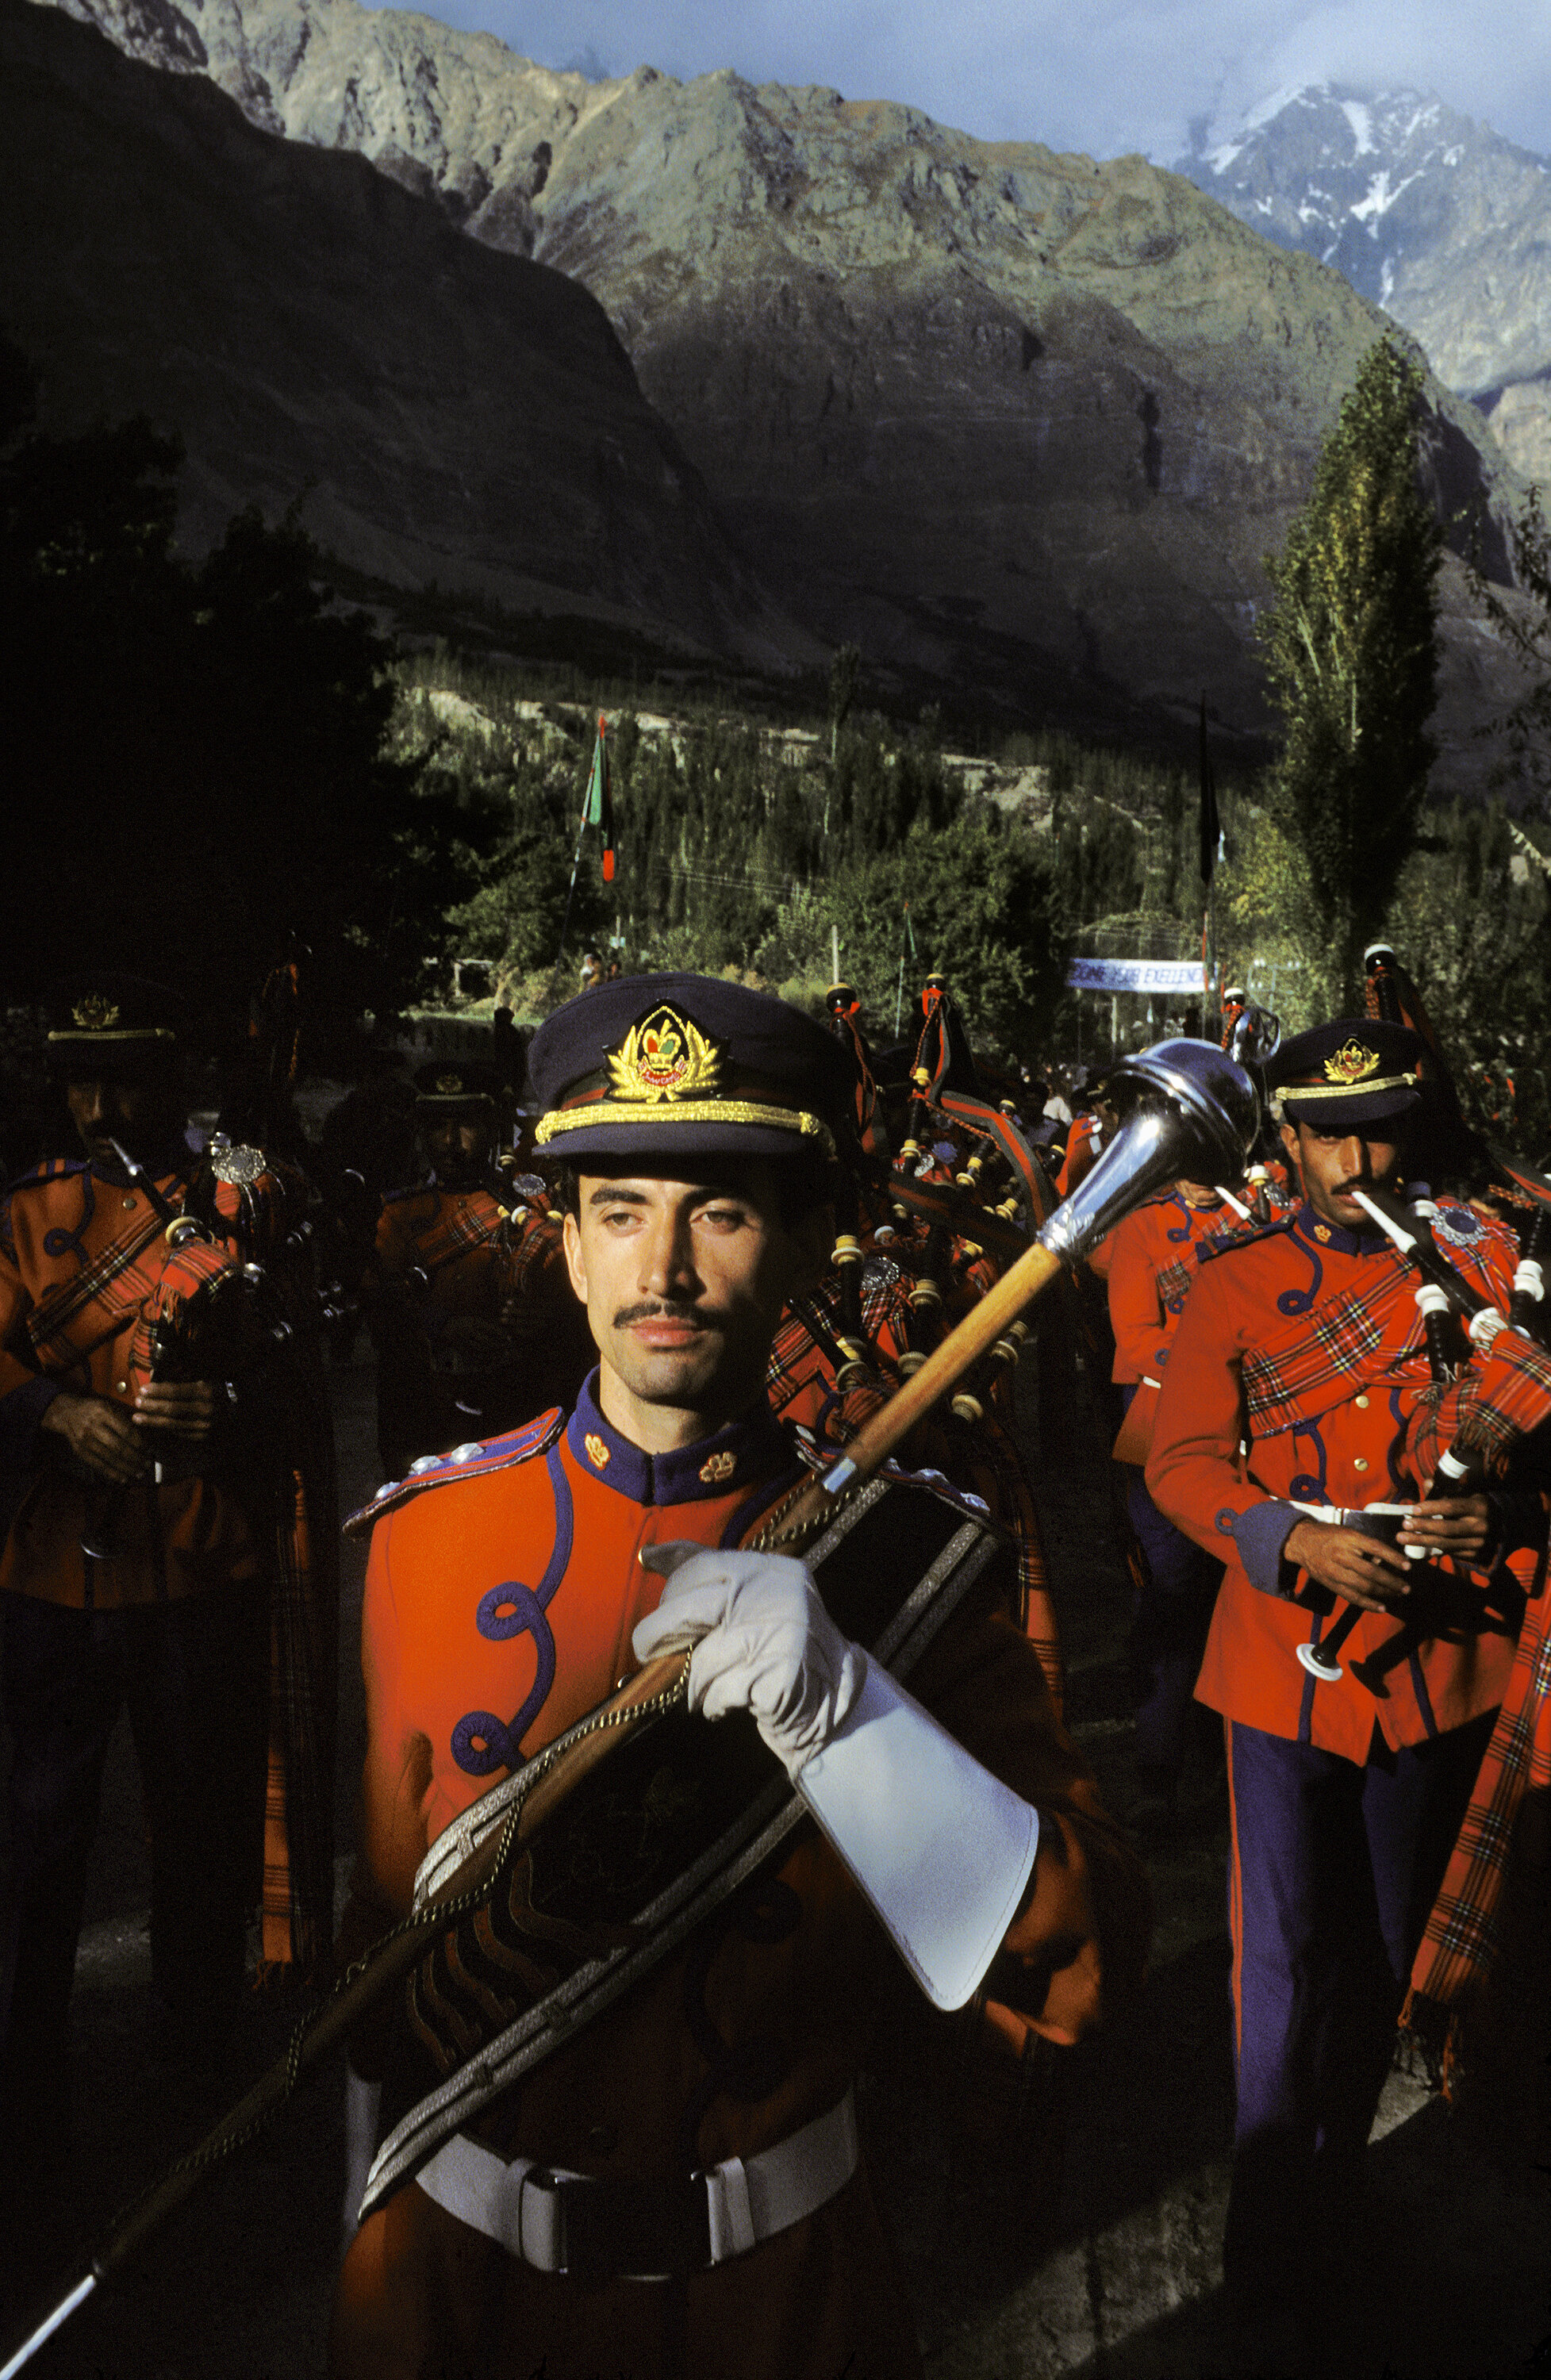  A pipe band marches through Aliabad on the Karakoram Highway in preparation for the Aga Khan’s visit. Pakistan. 1998 